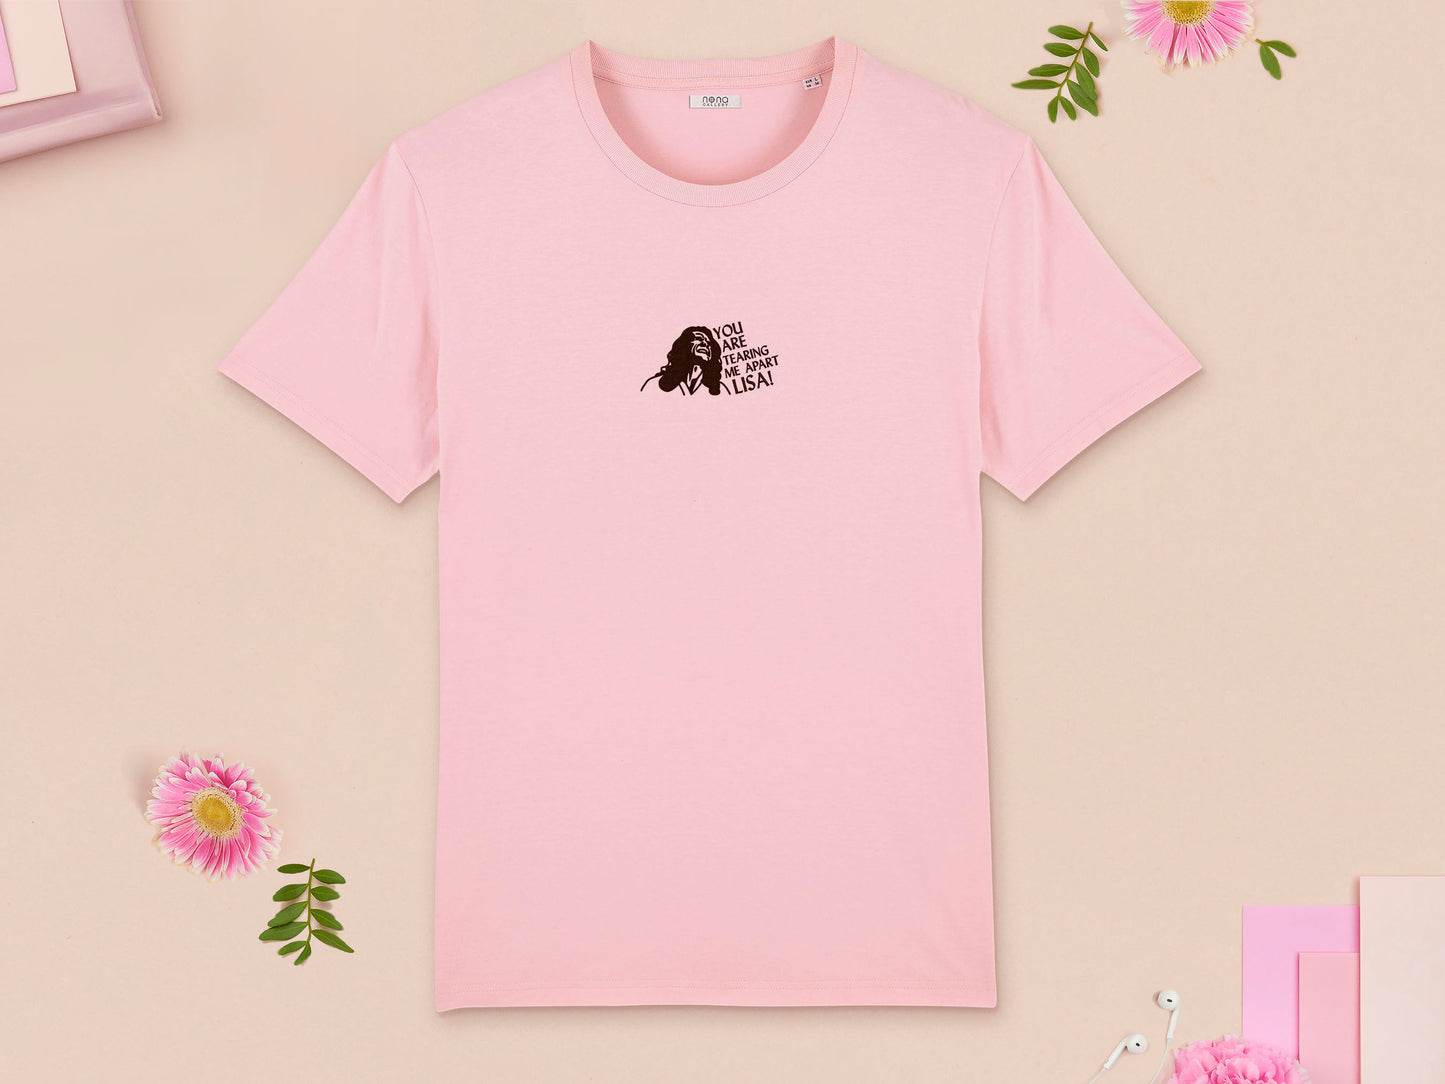 A short sleeved pink t-shirt with an embroidered brown design of Tommy Wiseau in the movie The Room with the quote You Are Tearing Me Apart Lisa!